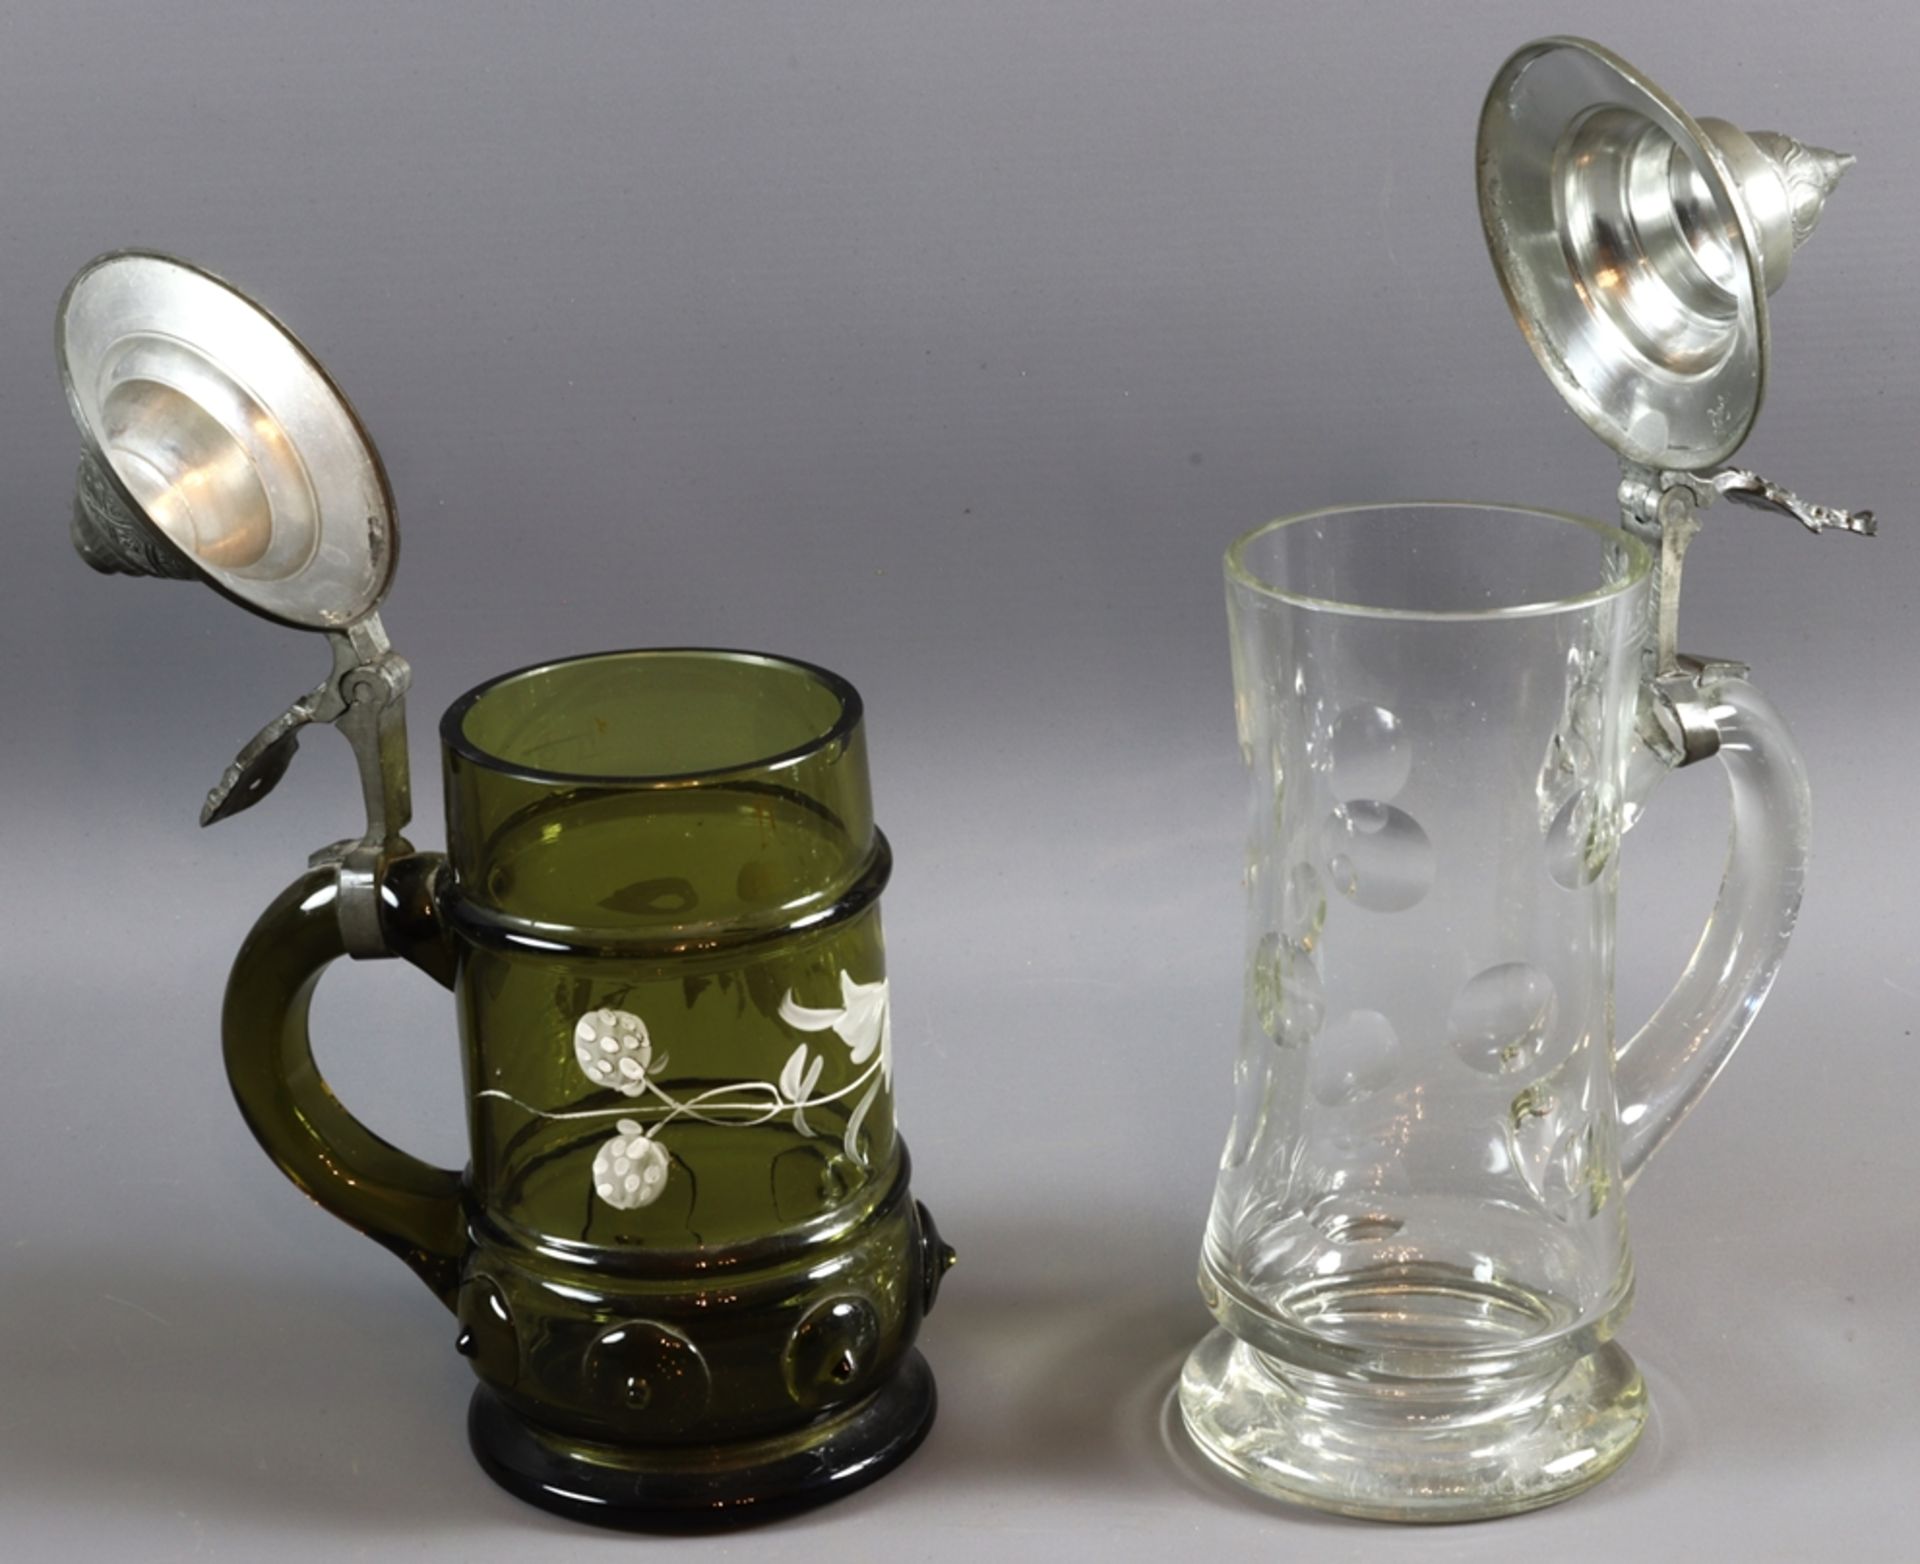 Five glass jugs of various types, Historicism circa 1890 - 1920, German - Image 2 of 7